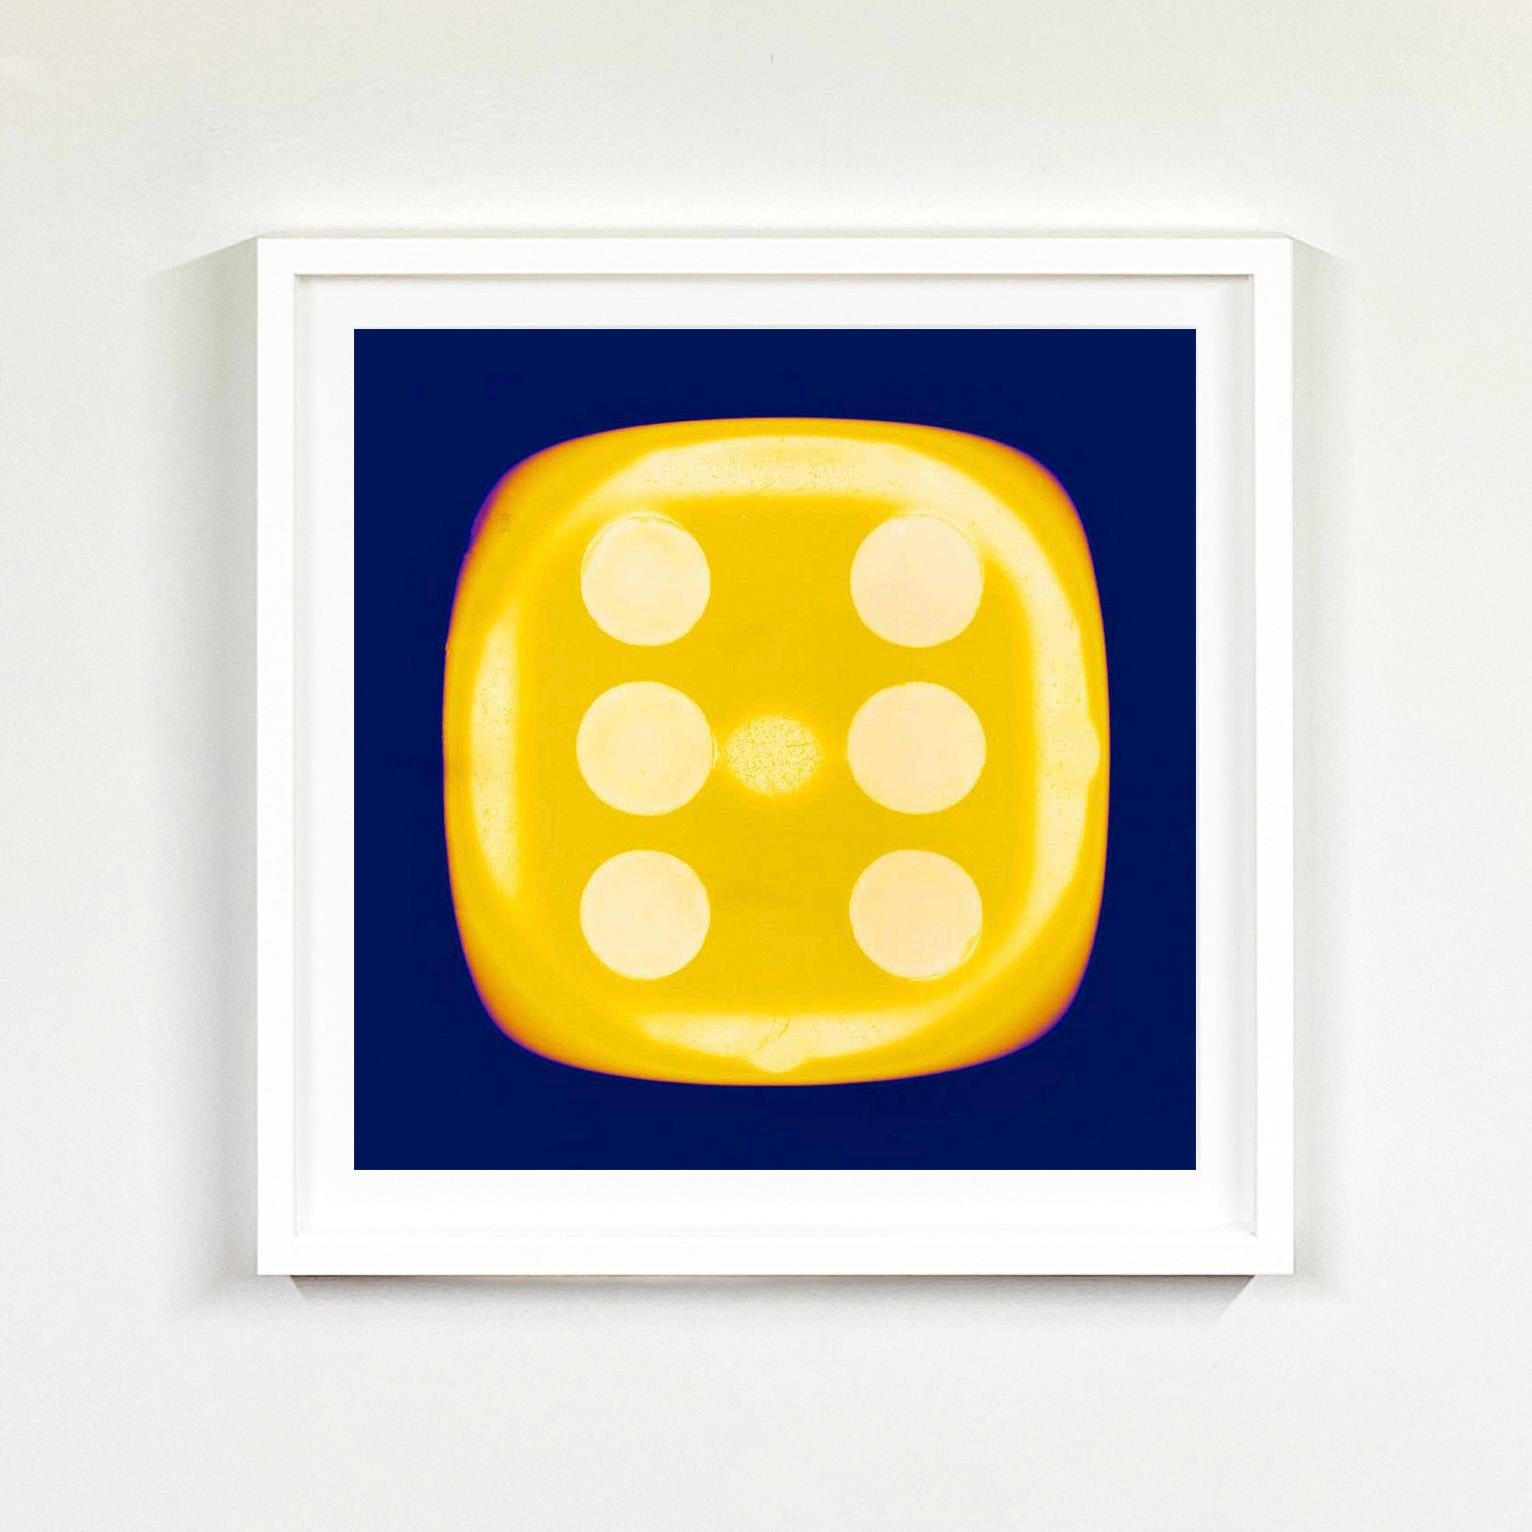 Dice Series, Chartreuse Yellow Six (inky blue) - Pop Art Color Photography - Print by Heidler & Heeps